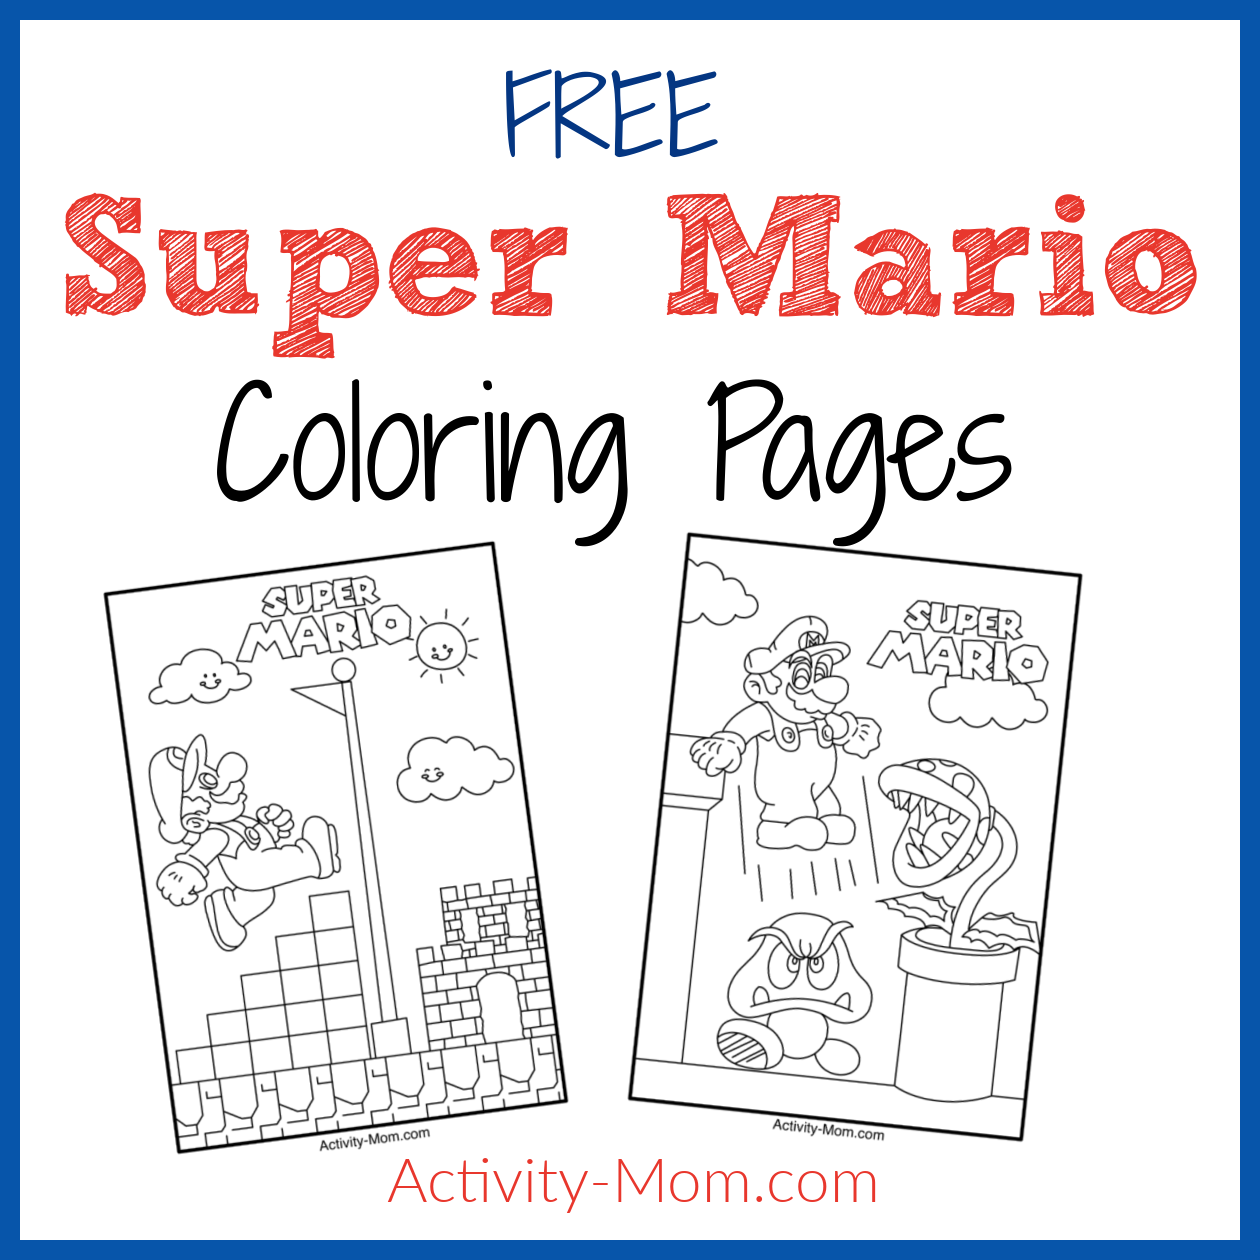 Pj masks coloring pages for kids free printable